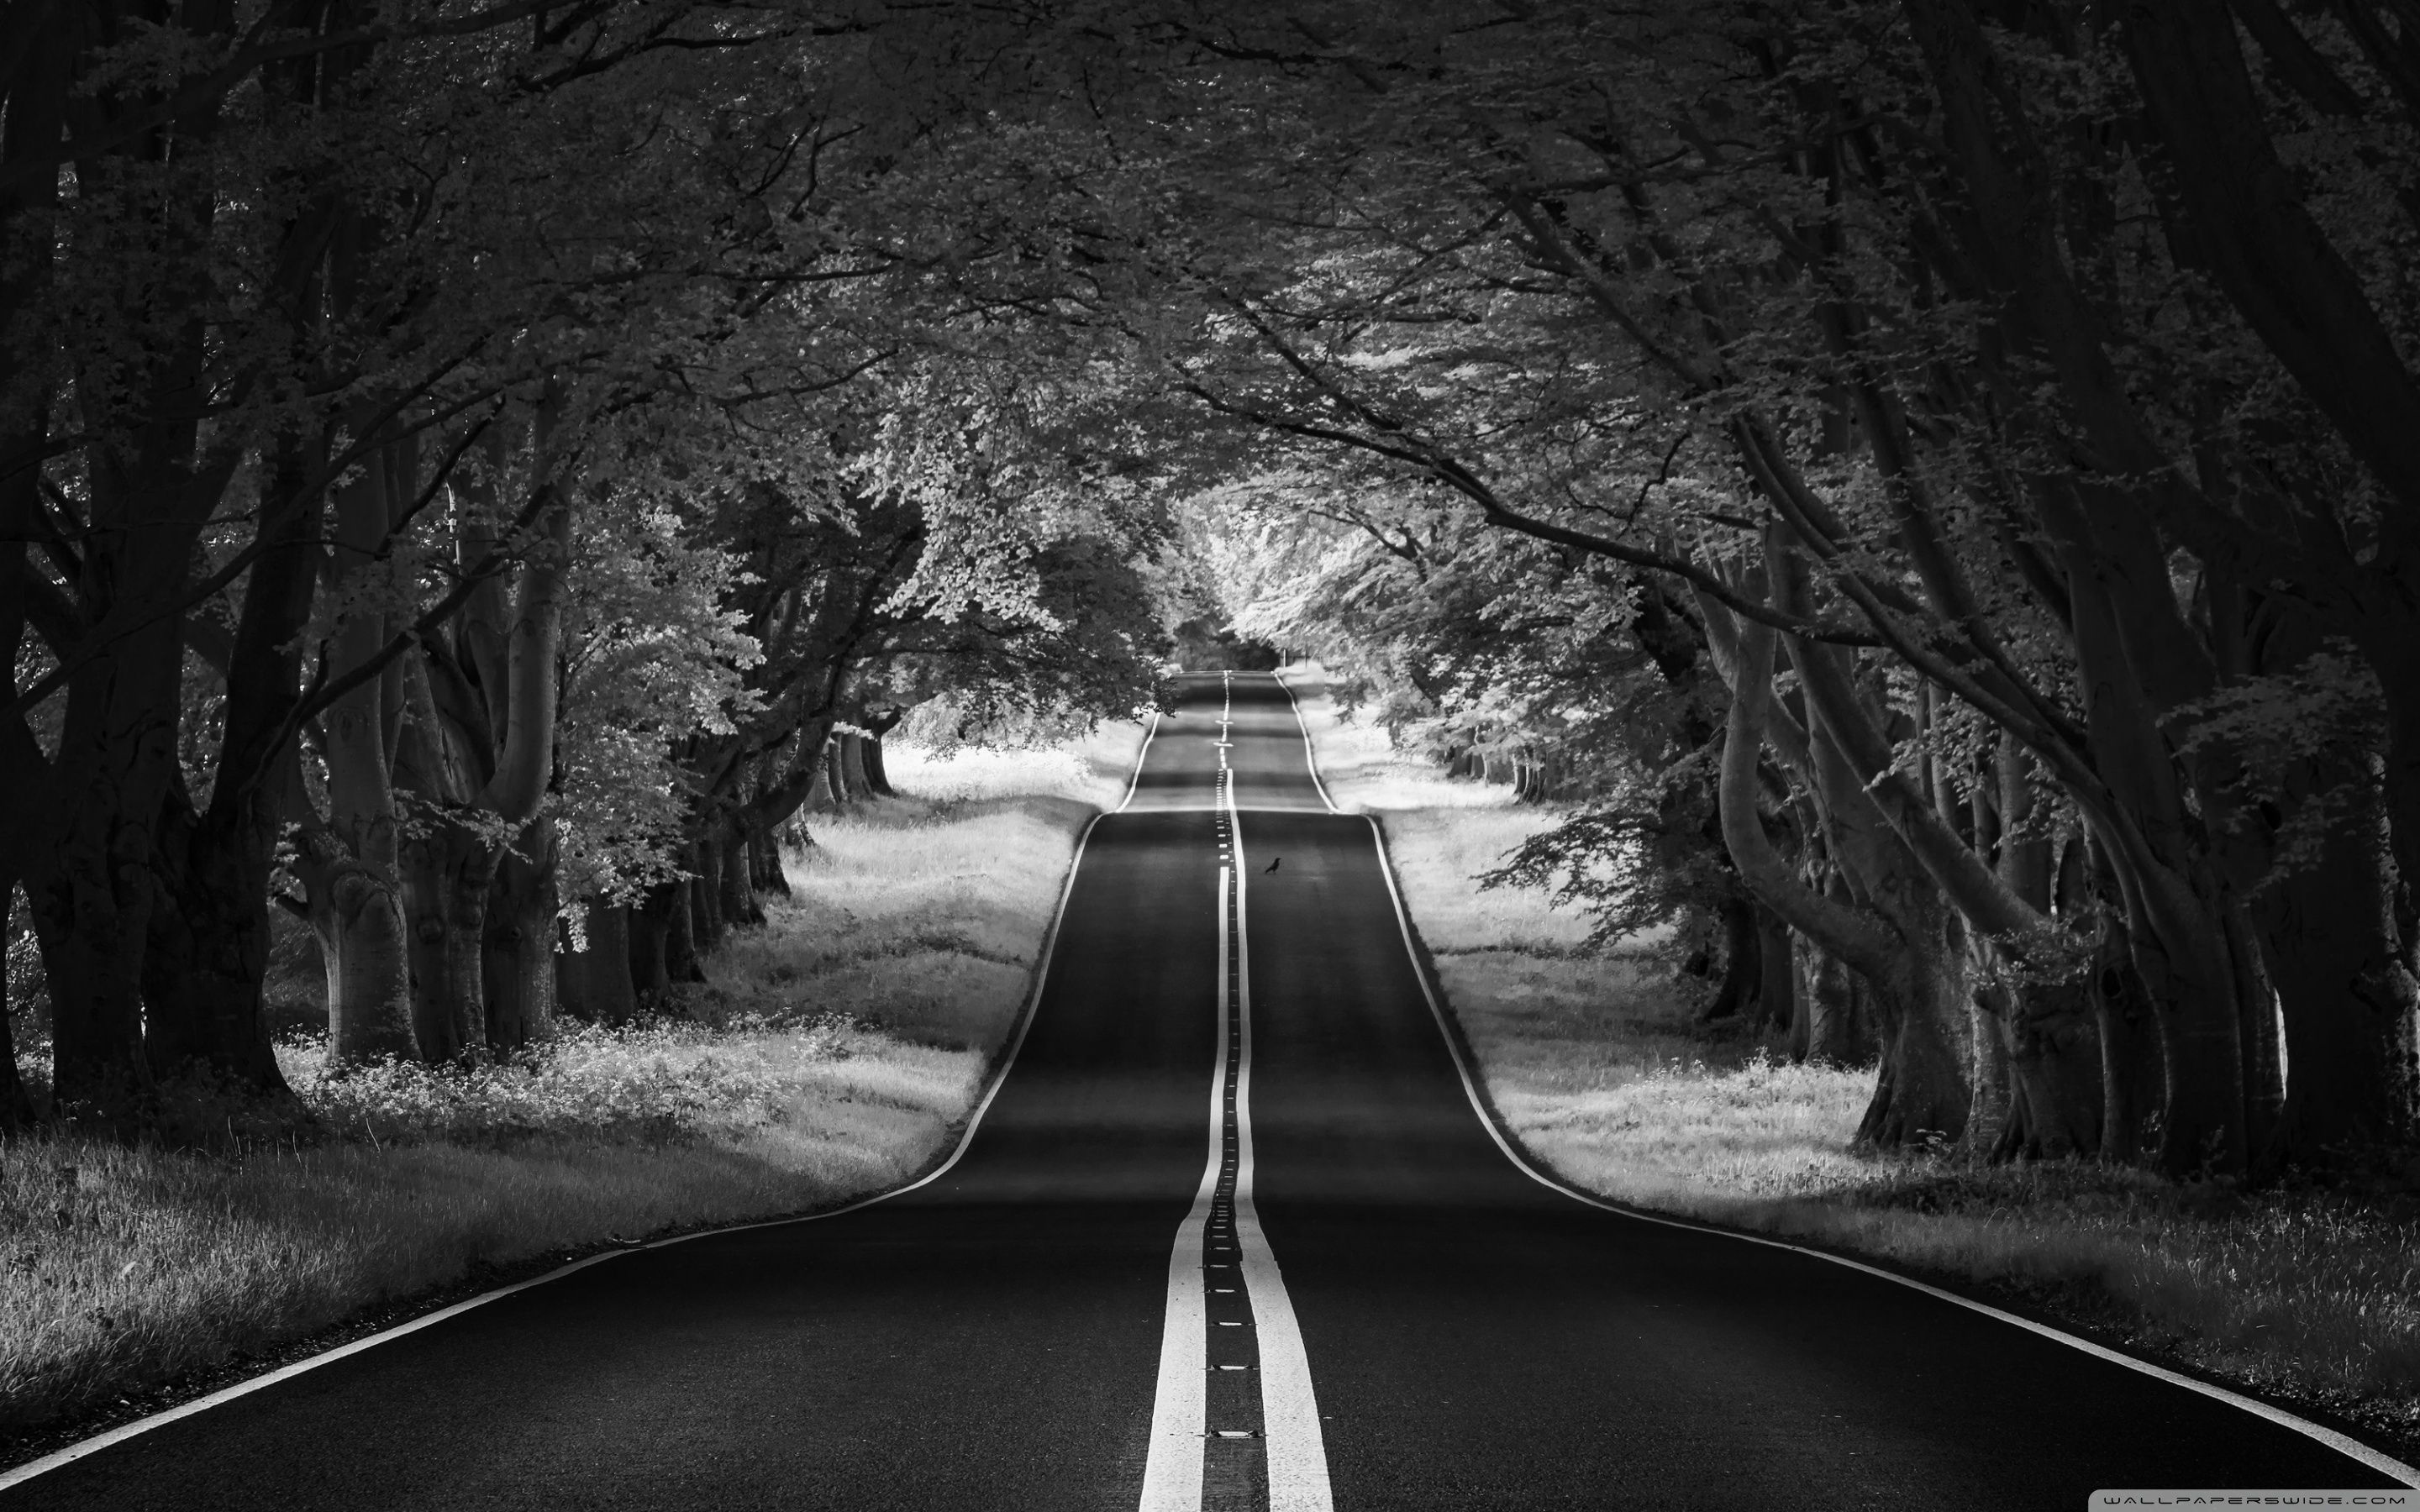 The road to the horizon, road, trees, black and white, 2560x1440 wallpaper - Forest, gray, photography, landscape, road, black and white, scenery